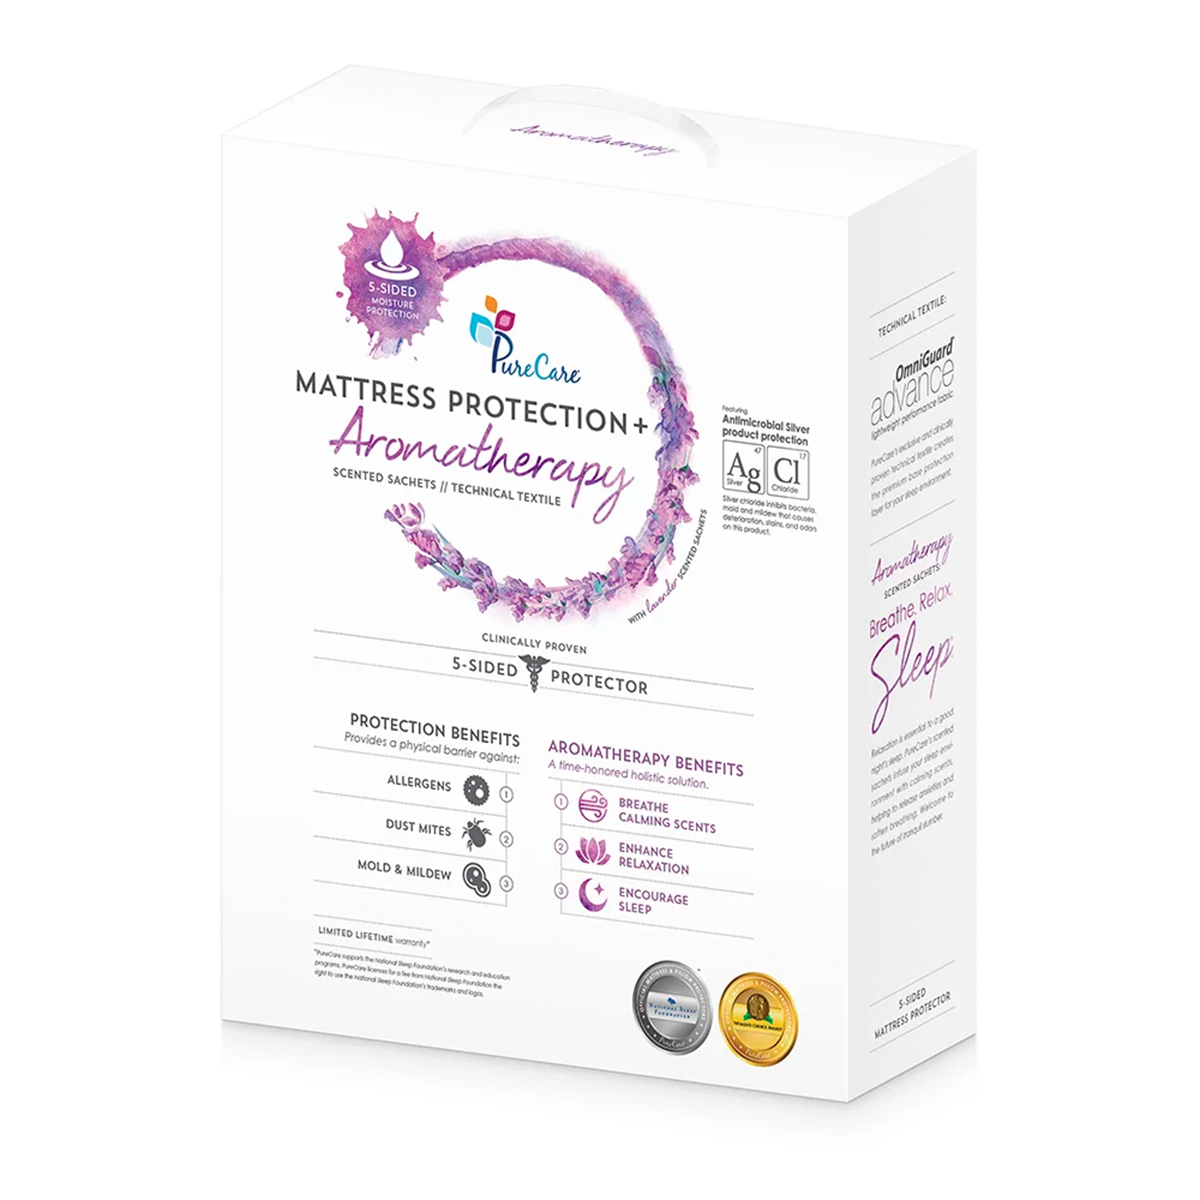 aromatherapy mattress protector by purecare package